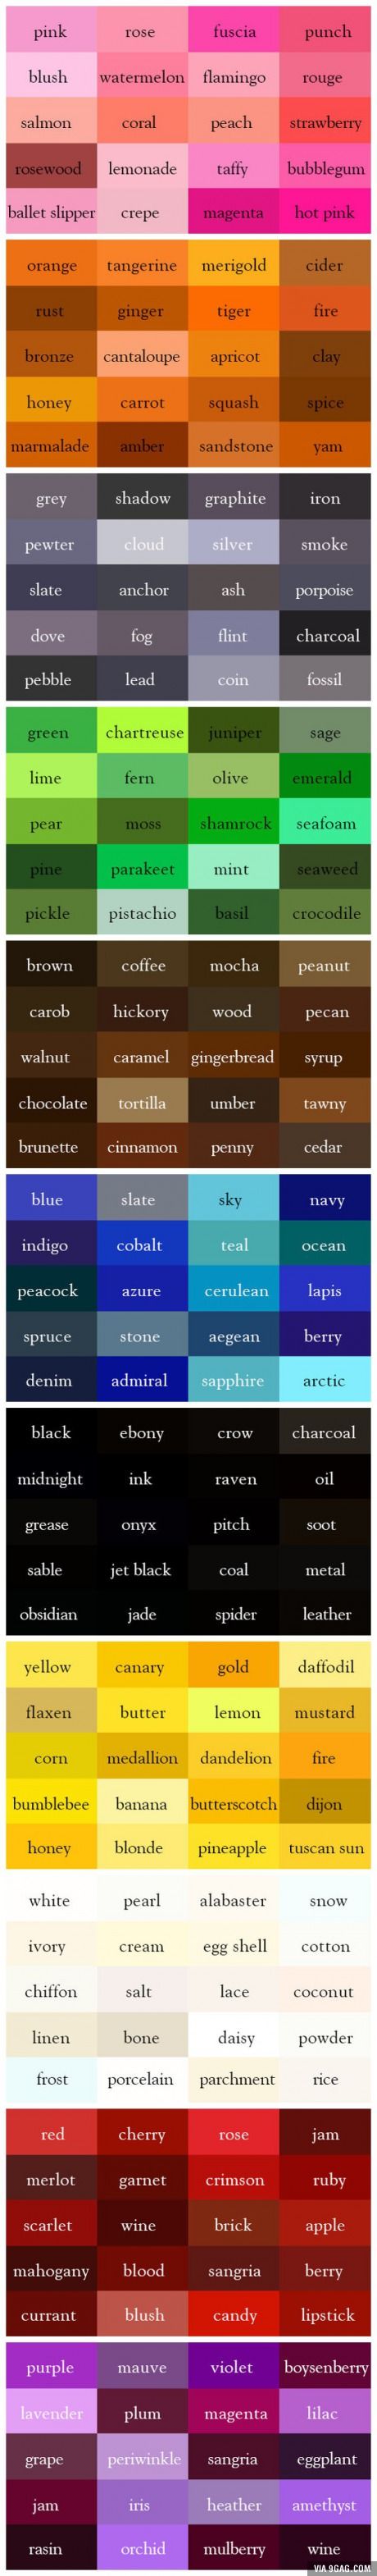 Psychology : Colors According to Girls - InfographicNow.com | Your ...